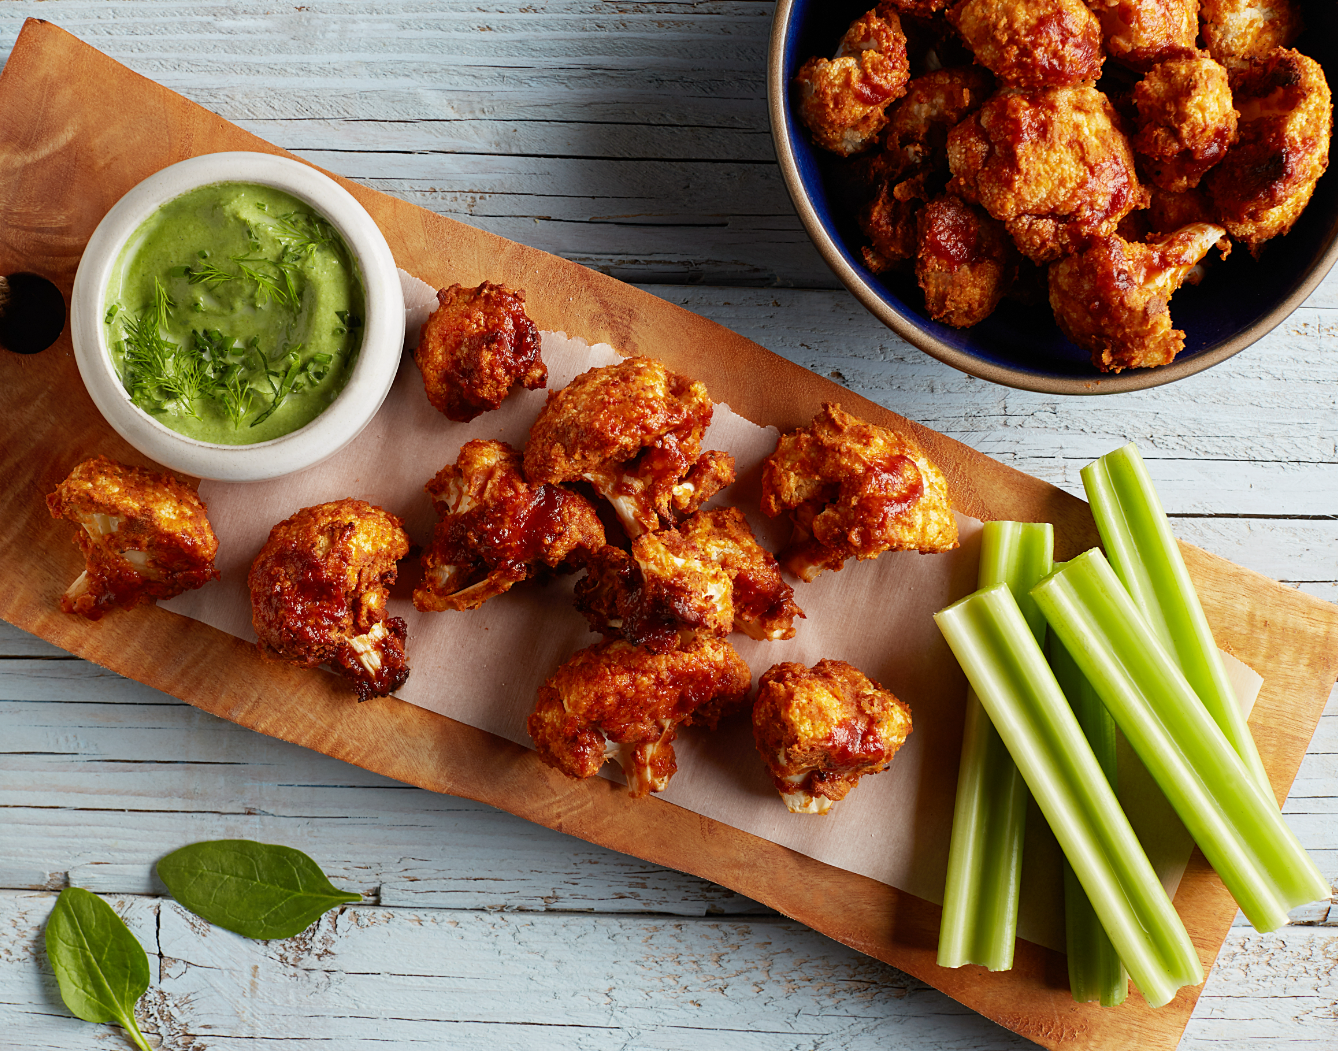 Buffalo cauliflower wings shown on a wooden serving board with sauce and celery sticks, a vegan recipe